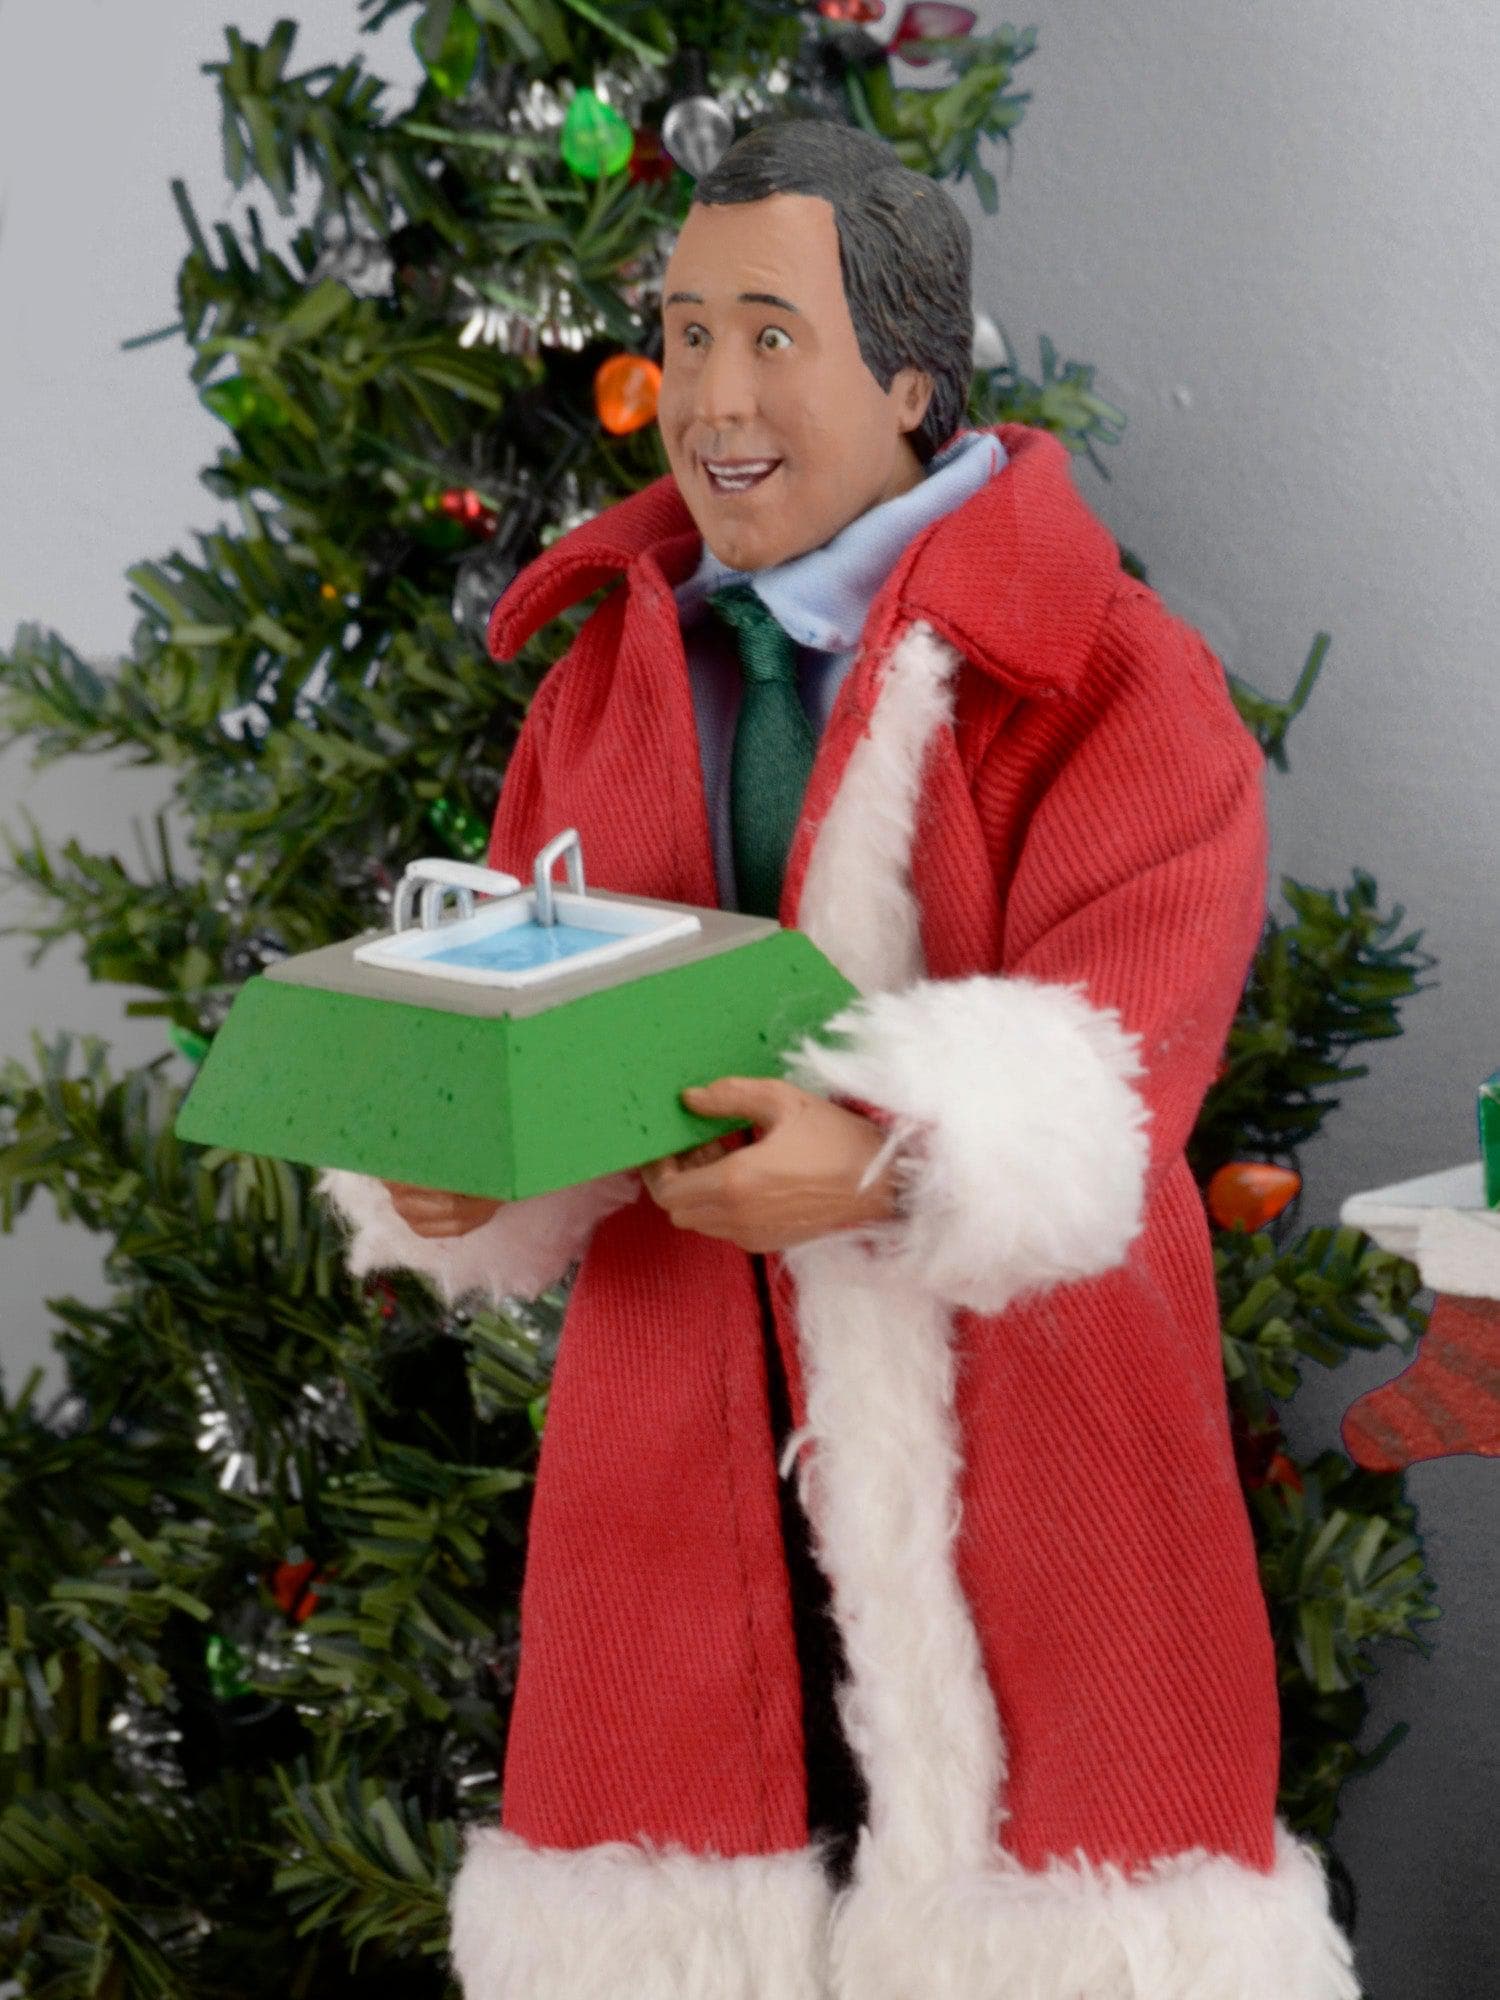 National Lampoon's Christmas Vacation - 8" Clothed Action Figure - Santa Clark - costumes.com